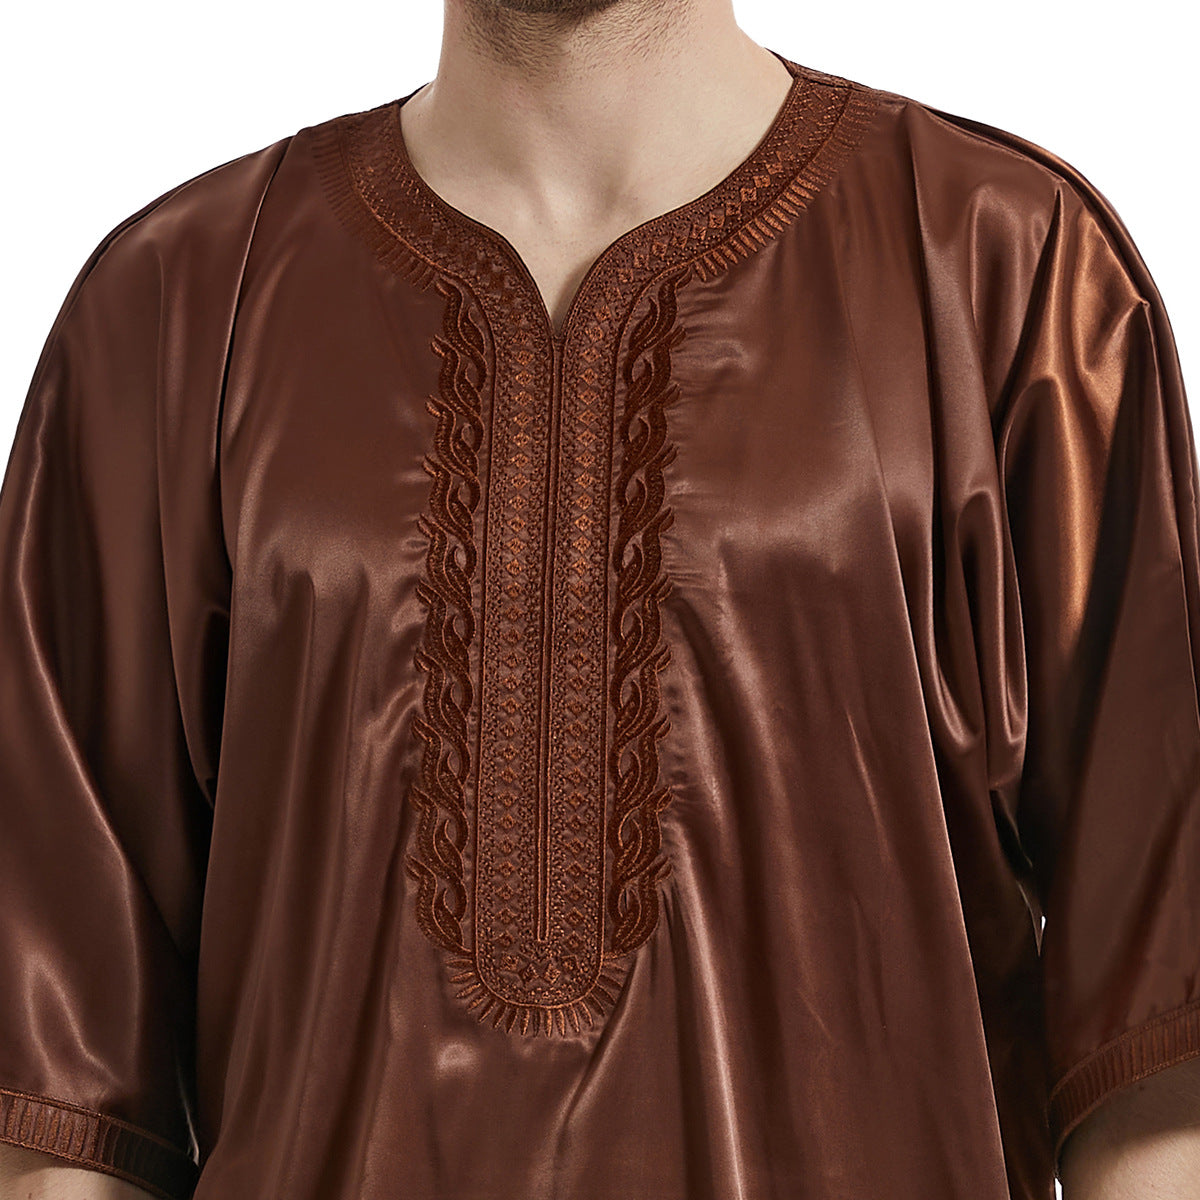 Discover sophistication with our Men's Abaya Half Sleeves in Coffee at Hikmah Boutique. Crafted from premium materials with exquisite embroidery, this abaya offers both style and comfort. Elevate your modest clothing wardrobe with this versatile Islamic attire.